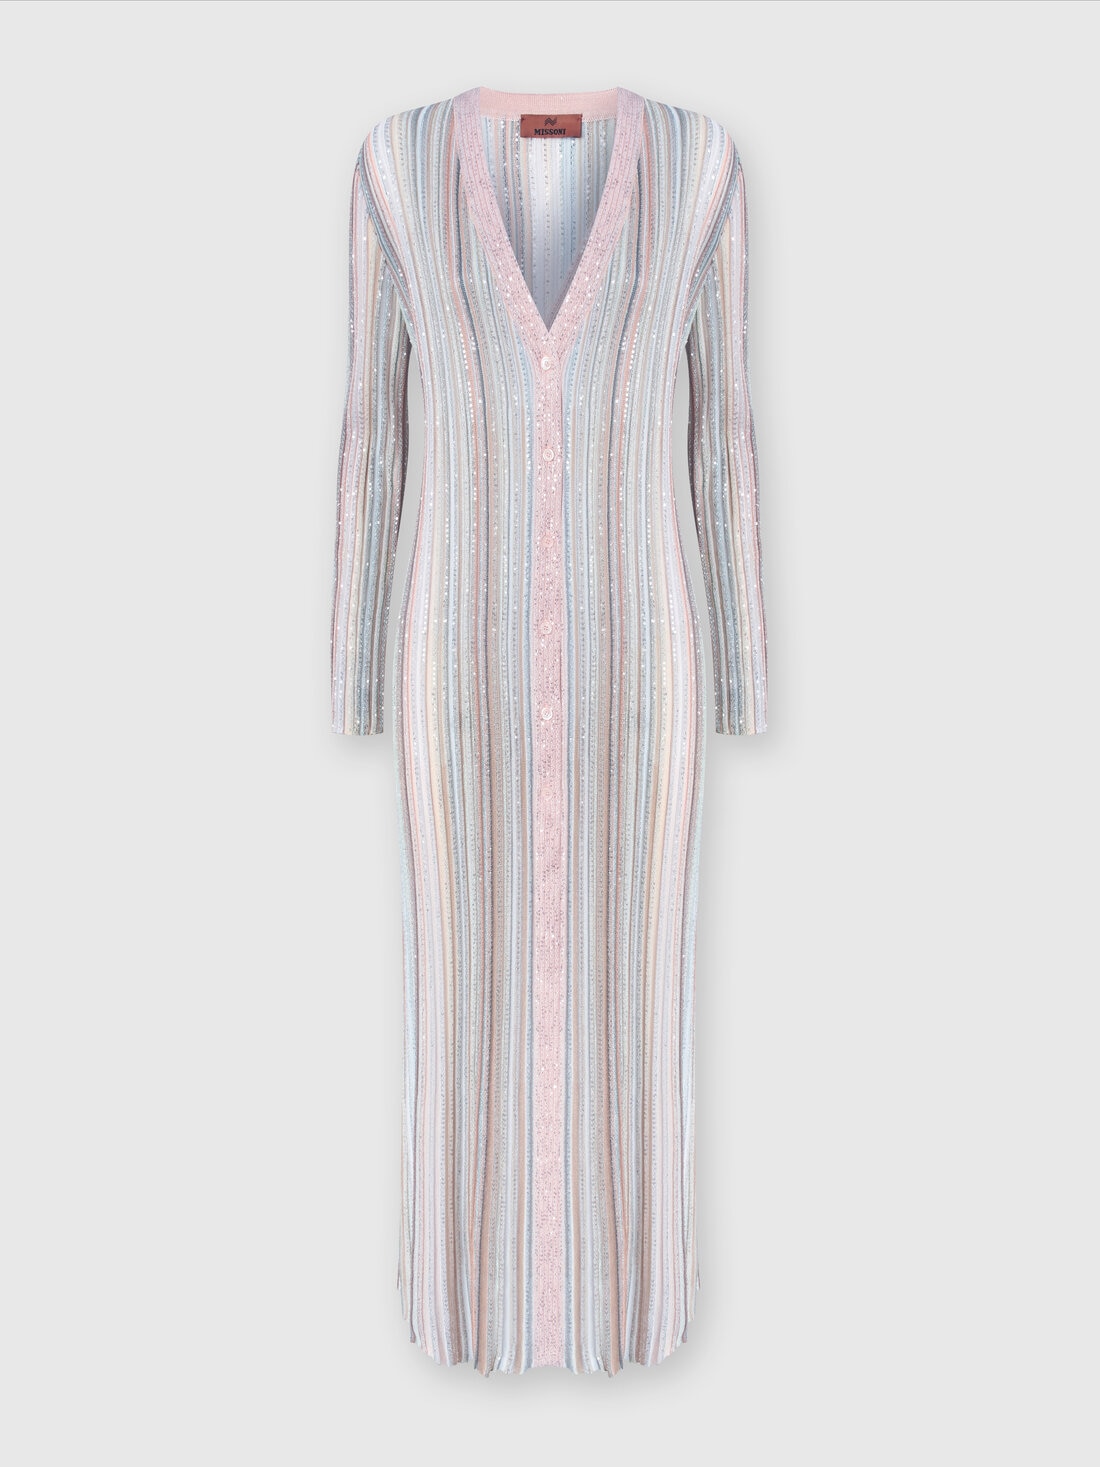 Long cardigan in vertical striped knit with sequins, Multicoloured  - DS24SM0ZBK033MSM9AH - 0